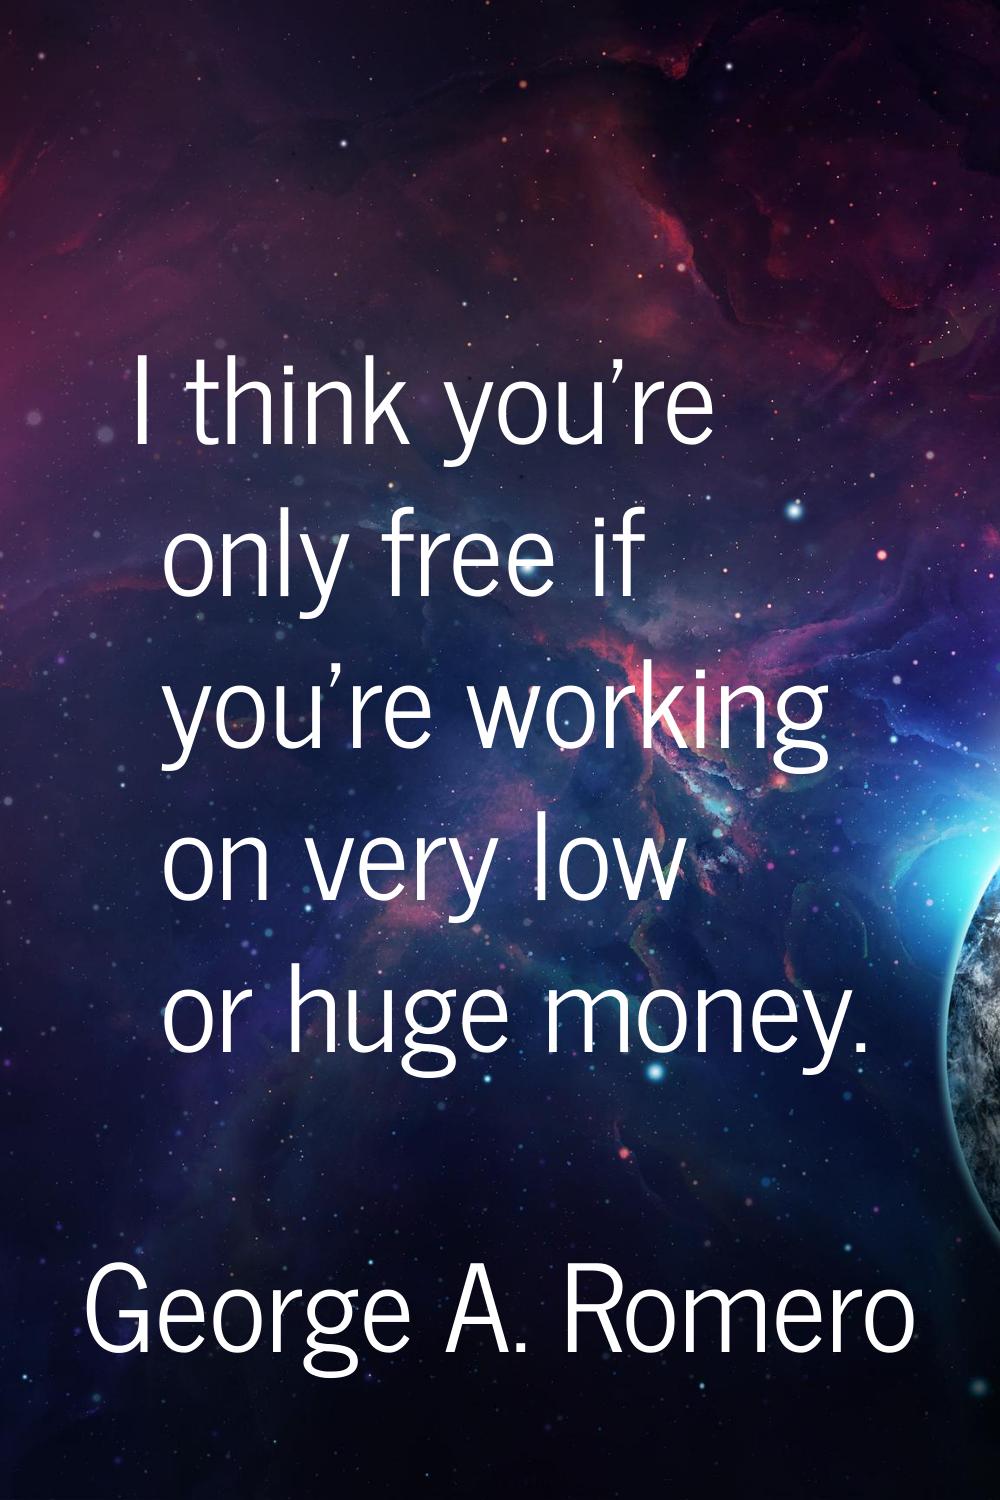 I think you're only free if you're working on very low or huge money.